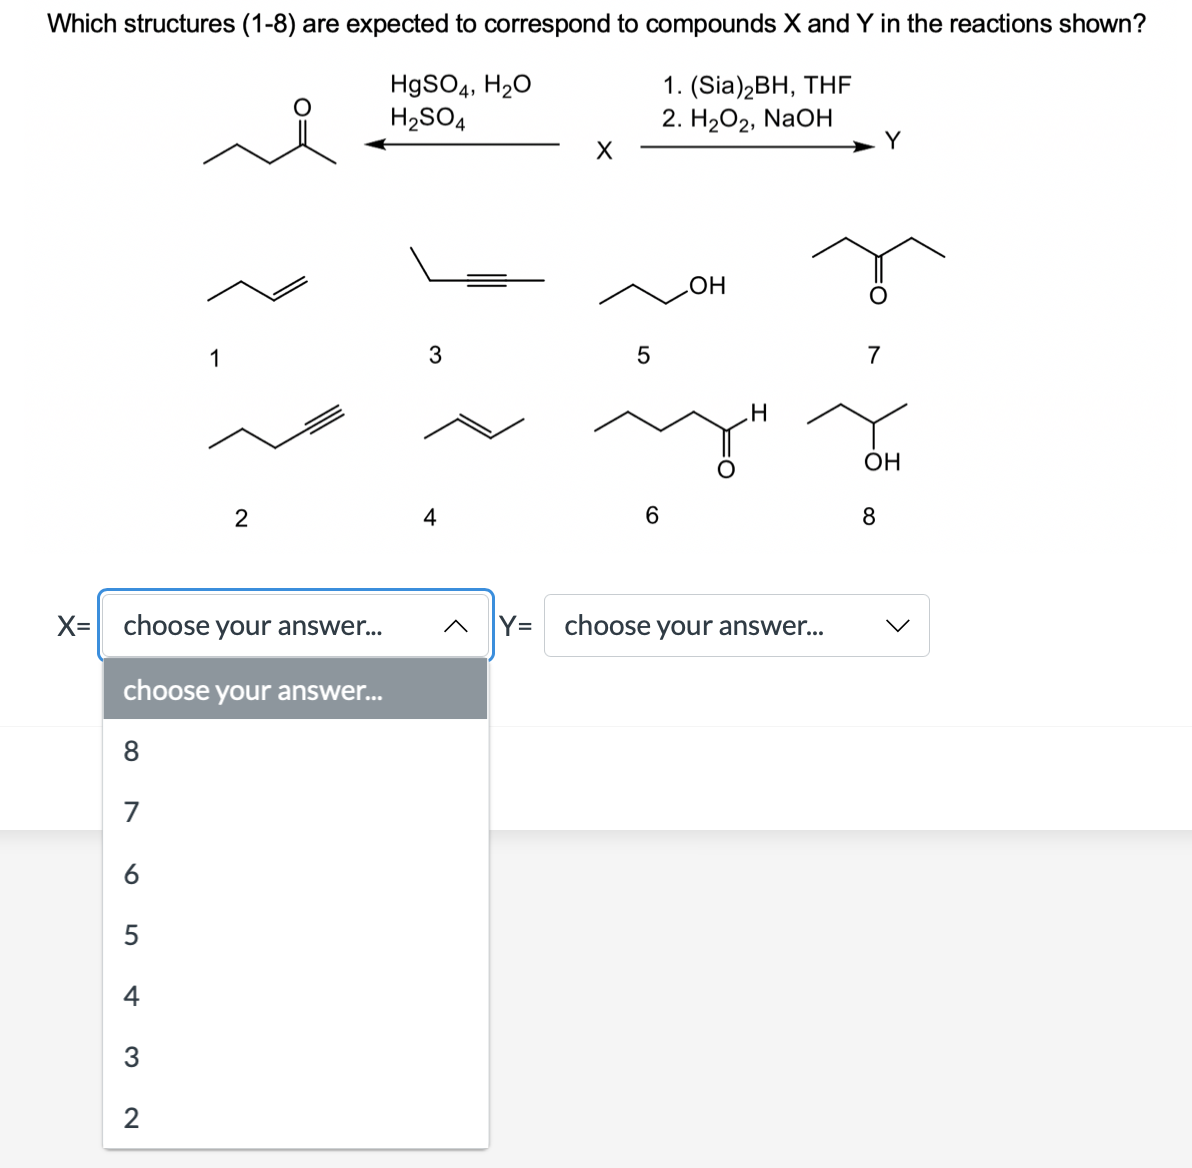 Which structures (1-8) are expected to correspond to compounds X and Y in the reactions shown?
HgSO4, H20
H2SO4
1. (Sia)2BH, THF
2. H2O2, NaOH
Y
1
7
OH
4
8
X= choose your answer...
Y=
choose your answer...
choose your answer...
8
7
6
5
4
3
2
5
